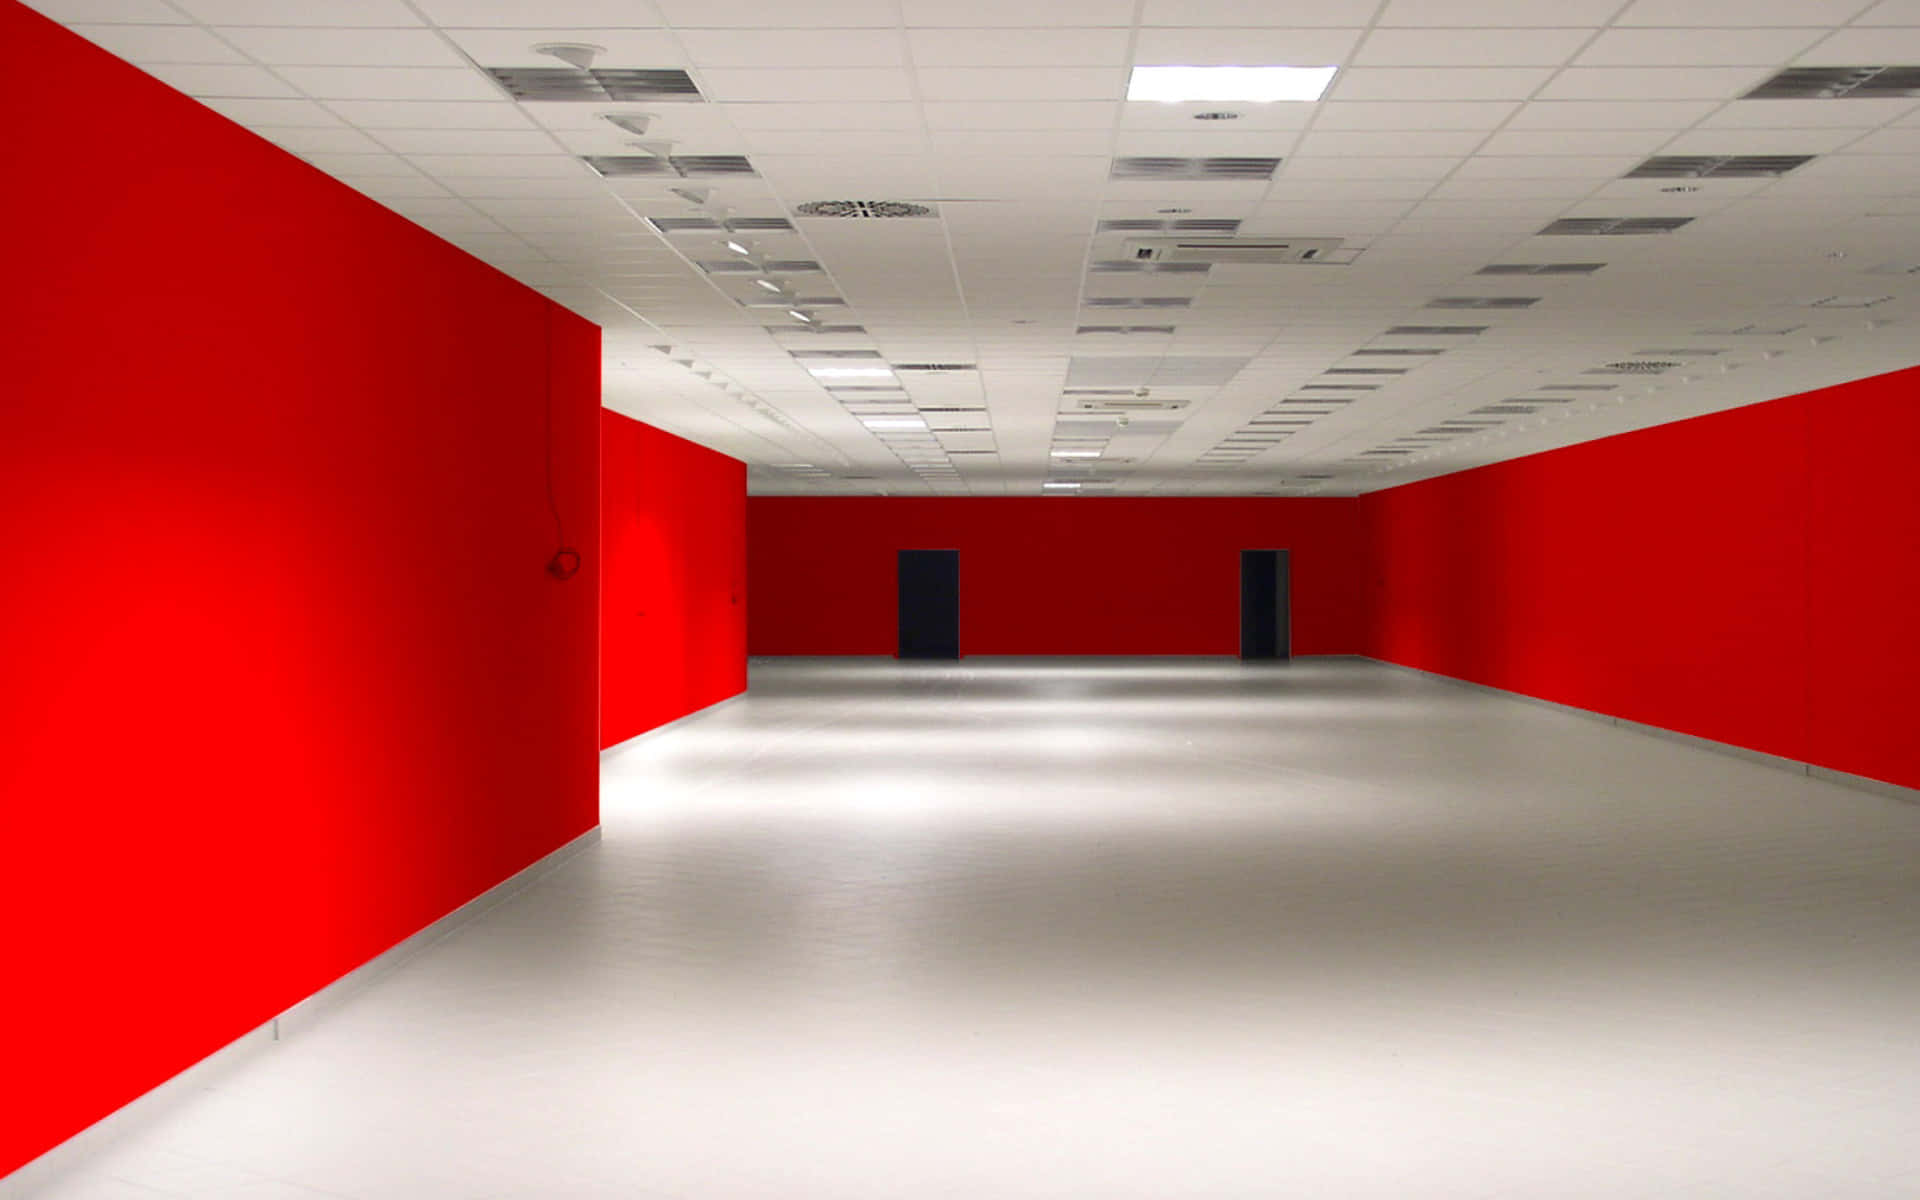 A Red Wall In A Room